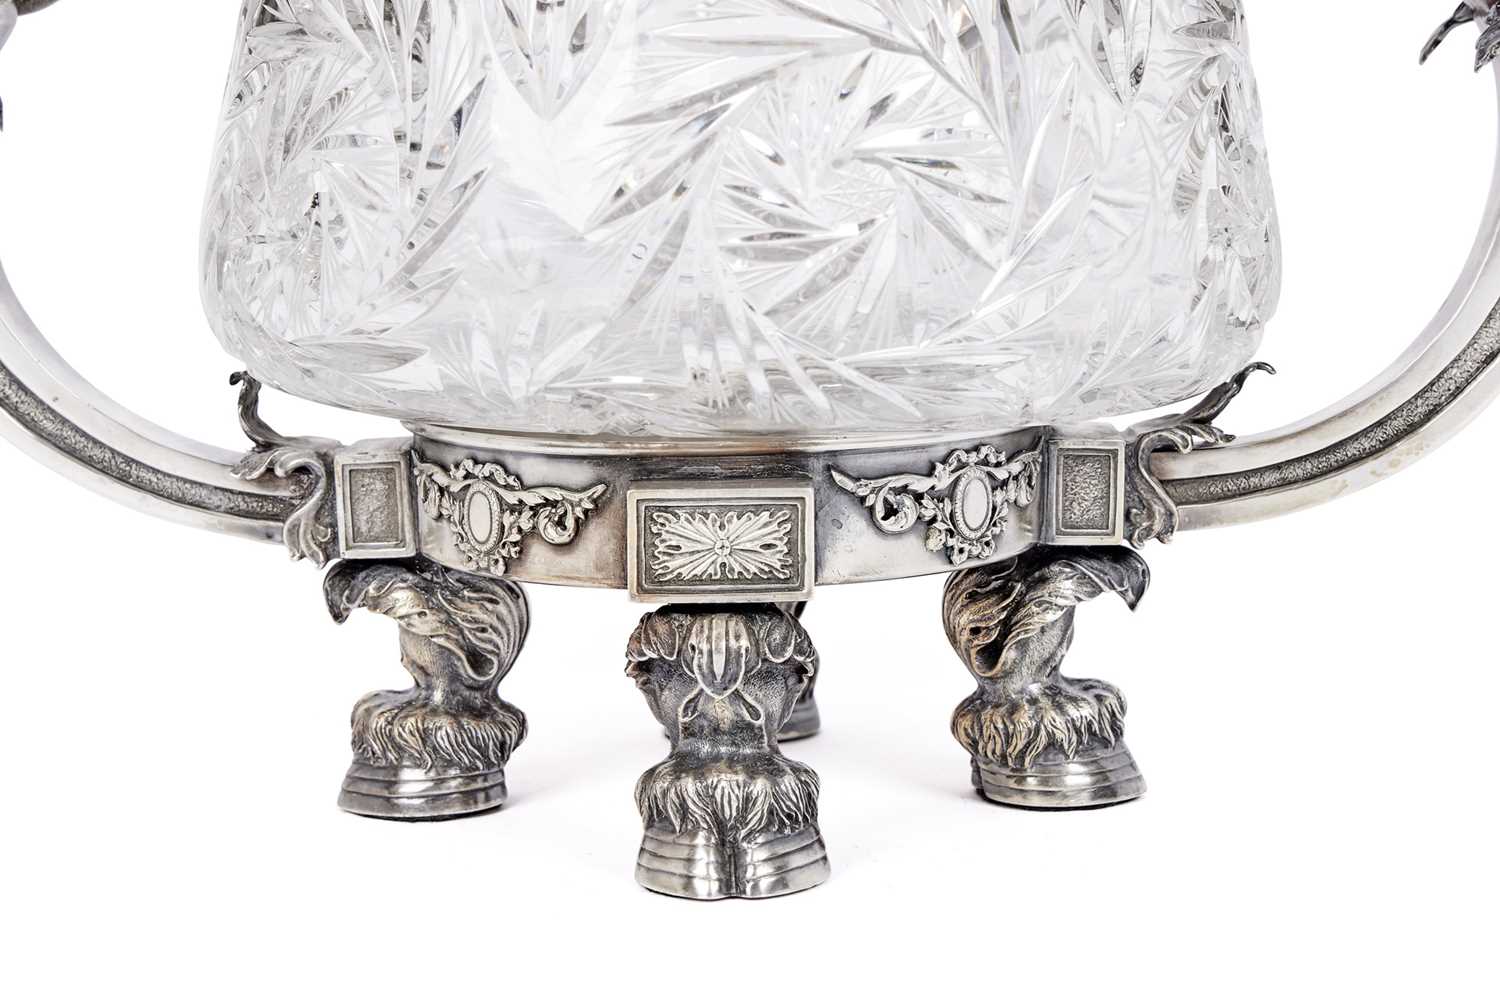 BOLIN, RUSSIA, CIRCA 1900: AN IMPRESSIVE SILVER AND CUT GLASS PUNCH BOWL - Image 3 of 4